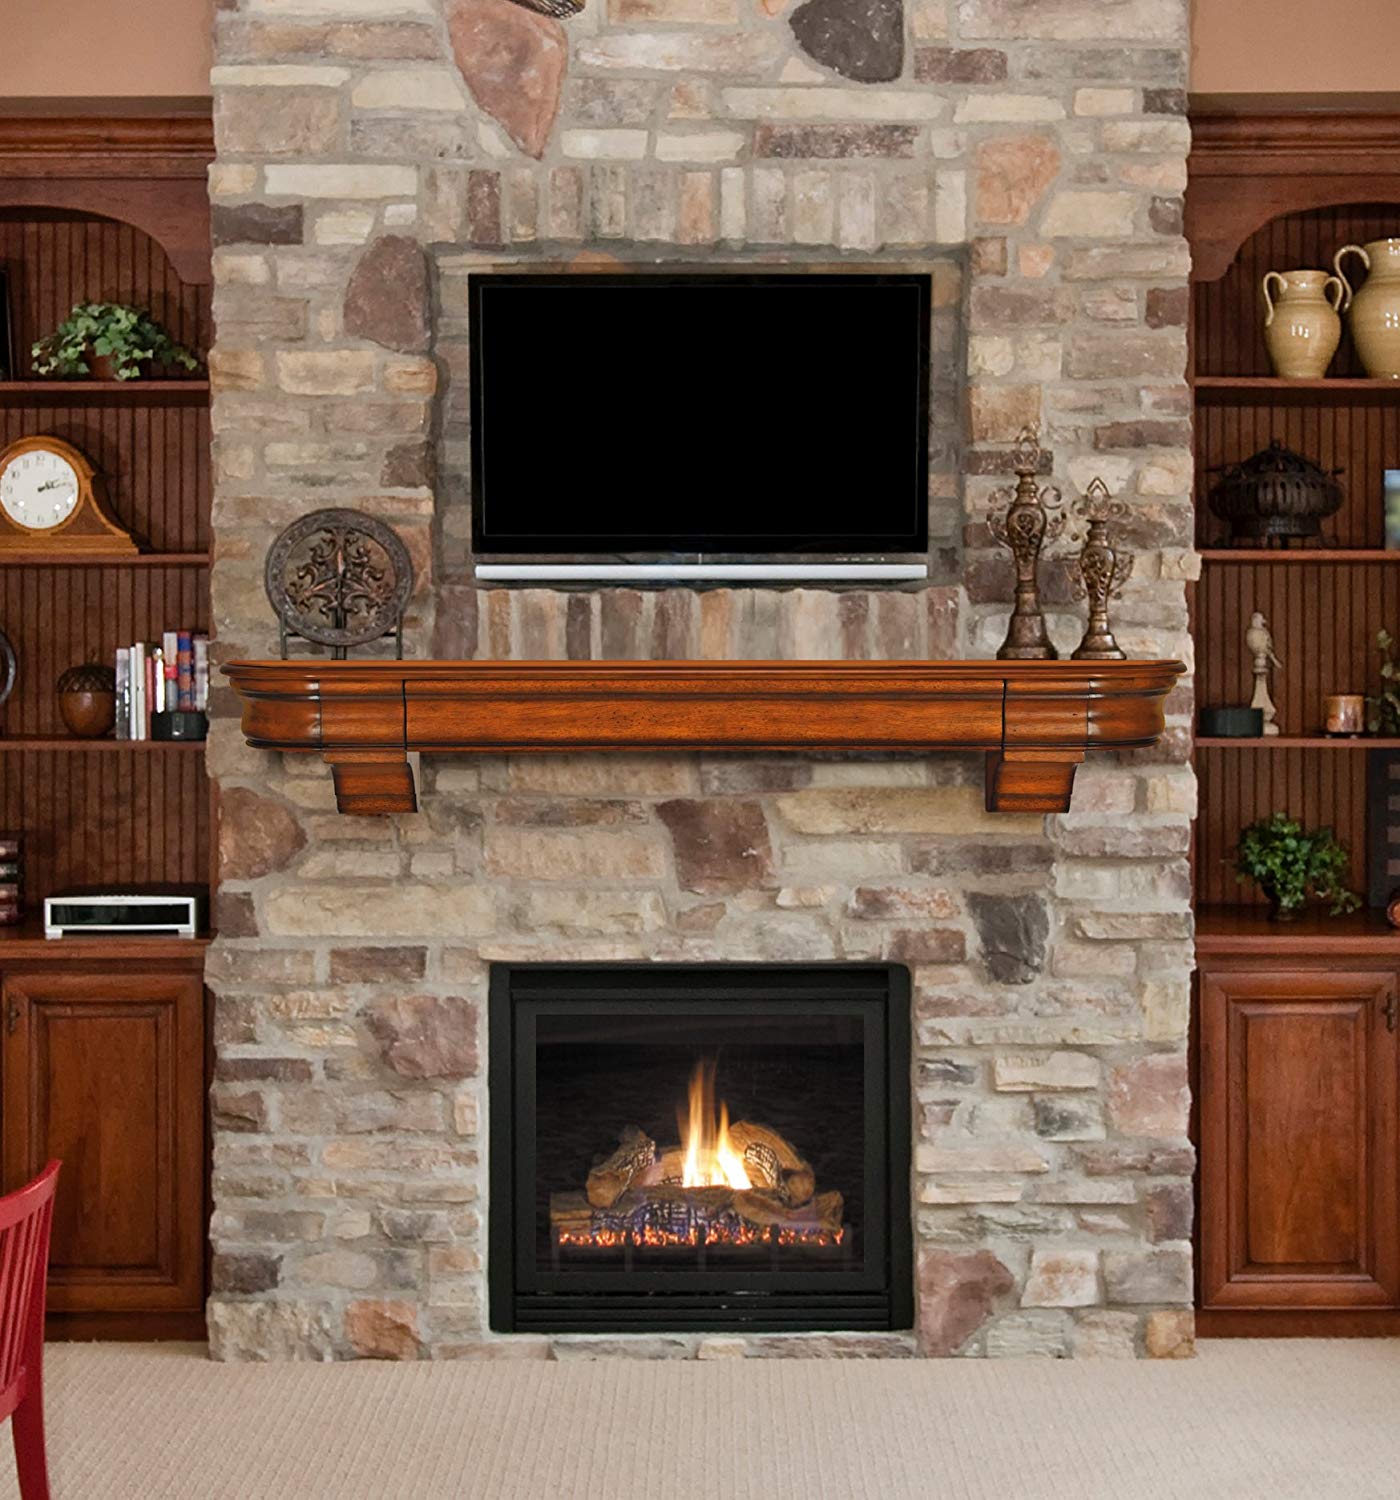 Fireplace Mantels with Hidden Storage Awesome Pearl Mantels 415 60 Abingdon Wood 60" Fireplace Mantel Shelf Unfinished